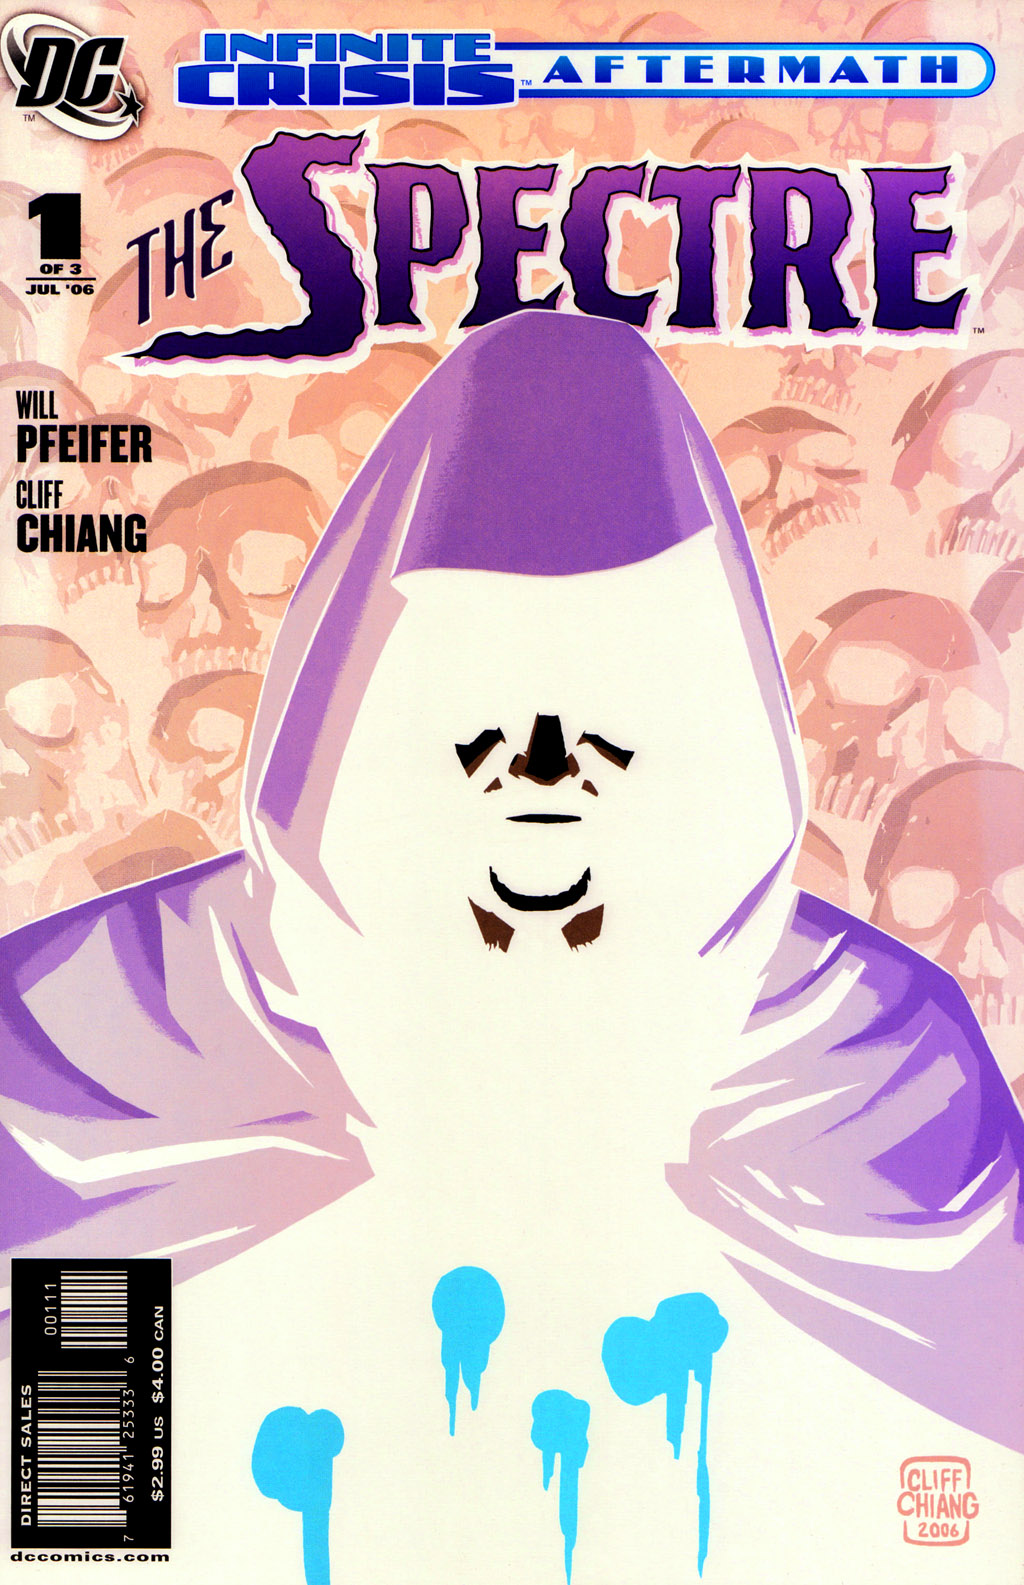 Read online Crisis Aftermath: The Spectre comic -  Issue #1 - 3